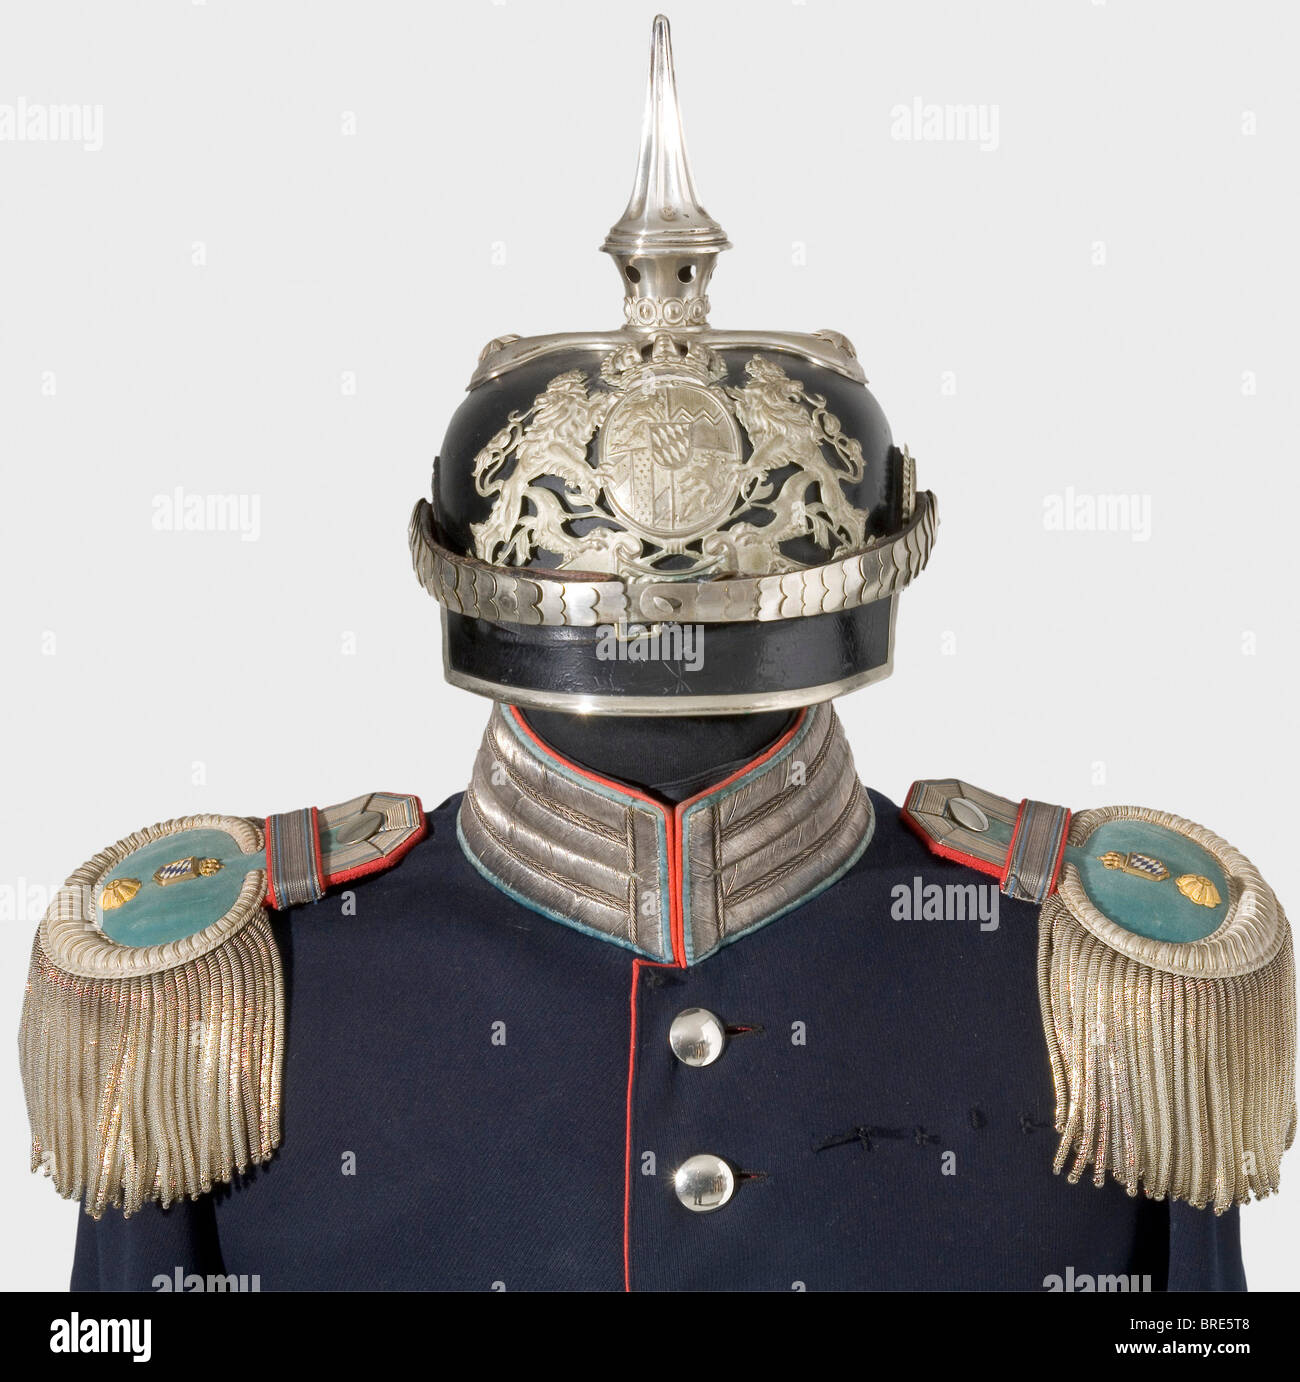 A helmet, uniform and insignia, from the estate of Senior Judge Advocate Gerstner A model 1886 helmet, leather skull with an angular front peak, clover leaf top plate, fluted spike, convex, silver-plated metal chinscales, officer's cockades, silver-plated emblem, and light blue silk lining with remnants of the owner's name in gold. It comes with the protective case. A dark blue uniform coat, silver buttons, poppy red piping and silver embroidery on the light blue velvet collar and cuffs. Epaulette loops cut off, but present. A pair of epaulettes for a Senior Ju, Stock Photo